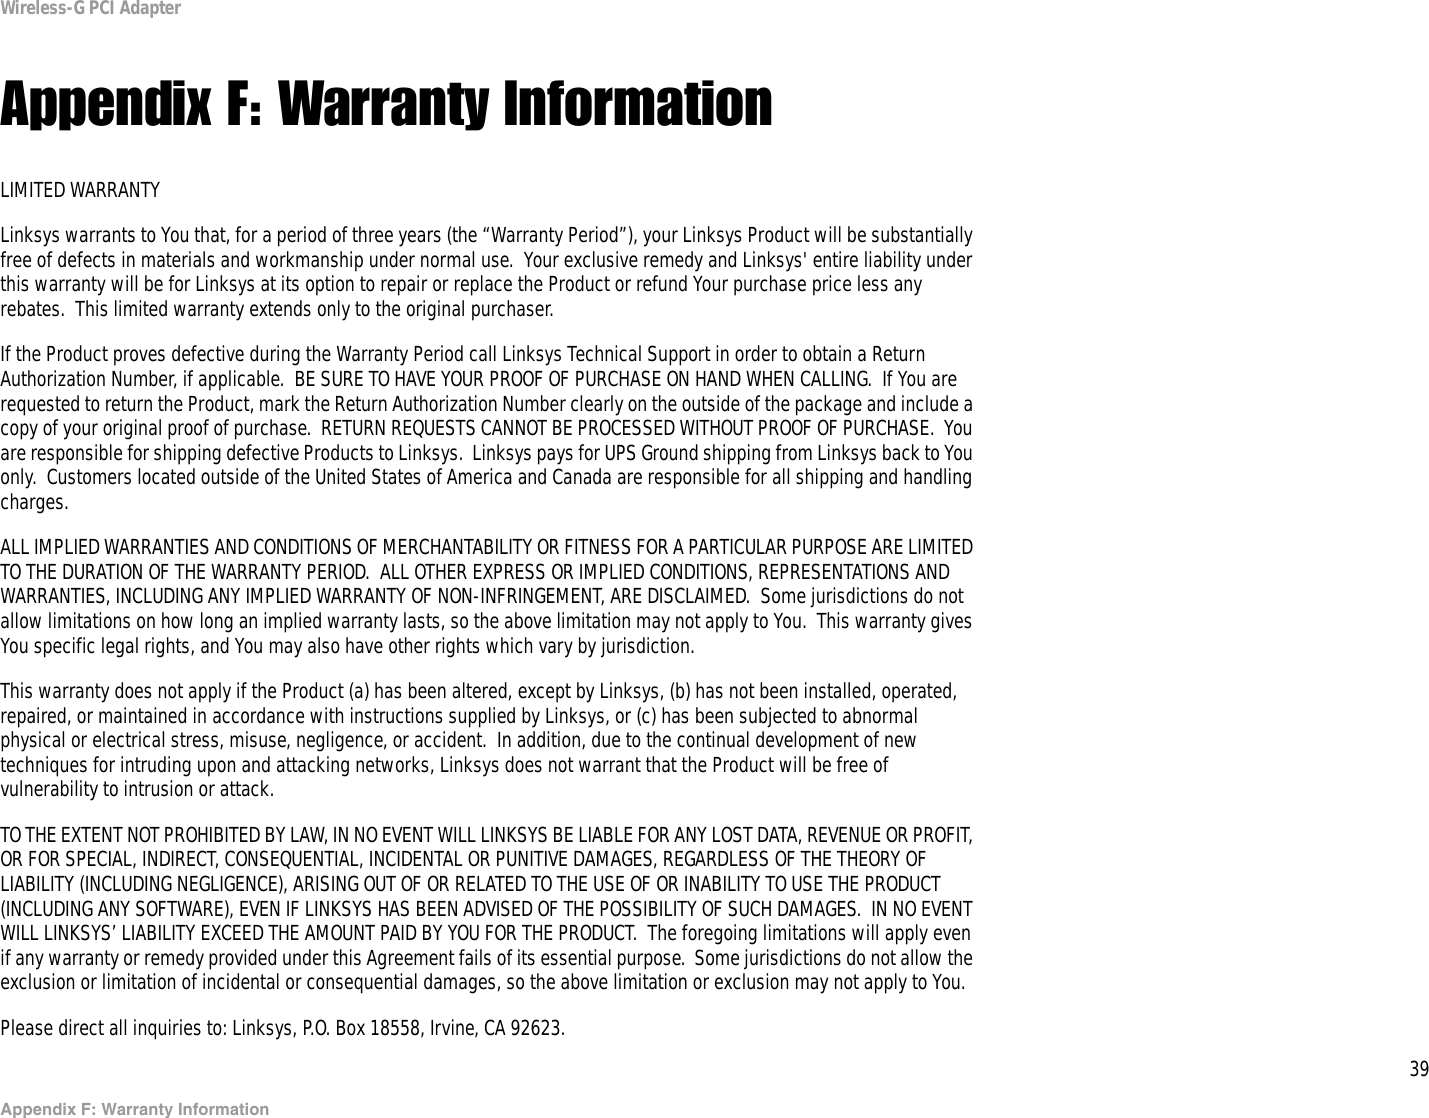 39Appendix F: Warranty InformationWireless-G PCI AdapterAppendix F: Warranty InformationLIMITED WARRANTYLinksys warrants to You that, for a period of three years (the “Warranty Period”), your Linksys Product will be substantially free of defects in materials and workmanship under normal use.  Your exclusive remedy and Linksys&apos; entire liability under this warranty will be for Linksys at its option to repair or replace the Product or refund Your purchase price less any rebates.  This limited warranty extends only to the original purchaser.  If the Product proves defective during the Warranty Period call Linksys Technical Support in order to obtain a Return Authorization Number, if applicable.  BE SURE TO HAVE YOUR PROOF OF PURCHASE ON HAND WHEN CALLING.  If You are requested to return the Product, mark the Return Authorization Number clearly on the outside of the package and include a copy of your original proof of purchase.  RETURN REQUESTS CANNOT BE PROCESSED WITHOUT PROOF OF PURCHASE.  You are responsible for shipping defective Products to Linksys.  Linksys pays for UPS Ground shipping from Linksys back to You only.  Customers located outside of the United States of America and Canada are responsible for all shipping and handling charges. ALL IMPLIED WARRANTIES AND CONDITIONS OF MERCHANTABILITY OR FITNESS FOR A PARTICULAR PURPOSE ARE LIMITED TO THE DURATION OF THE WARRANTY PERIOD.  ALL OTHER EXPRESS OR IMPLIED CONDITIONS, REPRESENTATIONS AND WARRANTIES, INCLUDING ANY IMPLIED WARRANTY OF NON-INFRINGEMENT, ARE DISCLAIMED.  Some jurisdictions do not allow limitations on how long an implied warranty lasts, so the above limitation may not apply to You.  This warranty gives You specific legal rights, and You may also have other rights which vary by jurisdiction.This warranty does not apply if the Product (a) has been altered, except by Linksys, (b) has not been installed, operated, repaired, or maintained in accordance with instructions supplied by Linksys, or (c) has been subjected to abnormal physical or electrical stress, misuse, negligence, or accident.  In addition, due to the continual development of new techniques for intruding upon and attacking networks, Linksys does not warrant that the Product will be free of vulnerability to intrusion or attack.TO THE EXTENT NOT PROHIBITED BY LAW, IN NO EVENT WILL LINKSYS BE LIABLE FOR ANY LOST DATA, REVENUE OR PROFIT, OR FOR SPECIAL, INDIRECT, CONSEQUENTIAL, INCIDENTAL OR PUNITIVE DAMAGES, REGARDLESS OF THE THEORY OF LIABILITY (INCLUDING NEGLIGENCE), ARISING OUT OF OR RELATED TO THE USE OF OR INABILITY TO USE THE PRODUCT (INCLUDING ANY SOFTWARE), EVEN IF LINKSYS HAS BEEN ADVISED OF THE POSSIBILITY OF SUCH DAMAGES.  IN NO EVENT WILL LINKSYS’ LIABILITY EXCEED THE AMOUNT PAID BY YOU FOR THE PRODUCT.  The foregoing limitations will apply even if any warranty or remedy provided under this Agreement fails of its essential purpose.  Some jurisdictions do not allow the exclusion or limitation of incidental or consequential damages, so the above limitation or exclusion may not apply to You.Please direct all inquiries to: Linksys, P.O. Box 18558, Irvine, CA 92623.